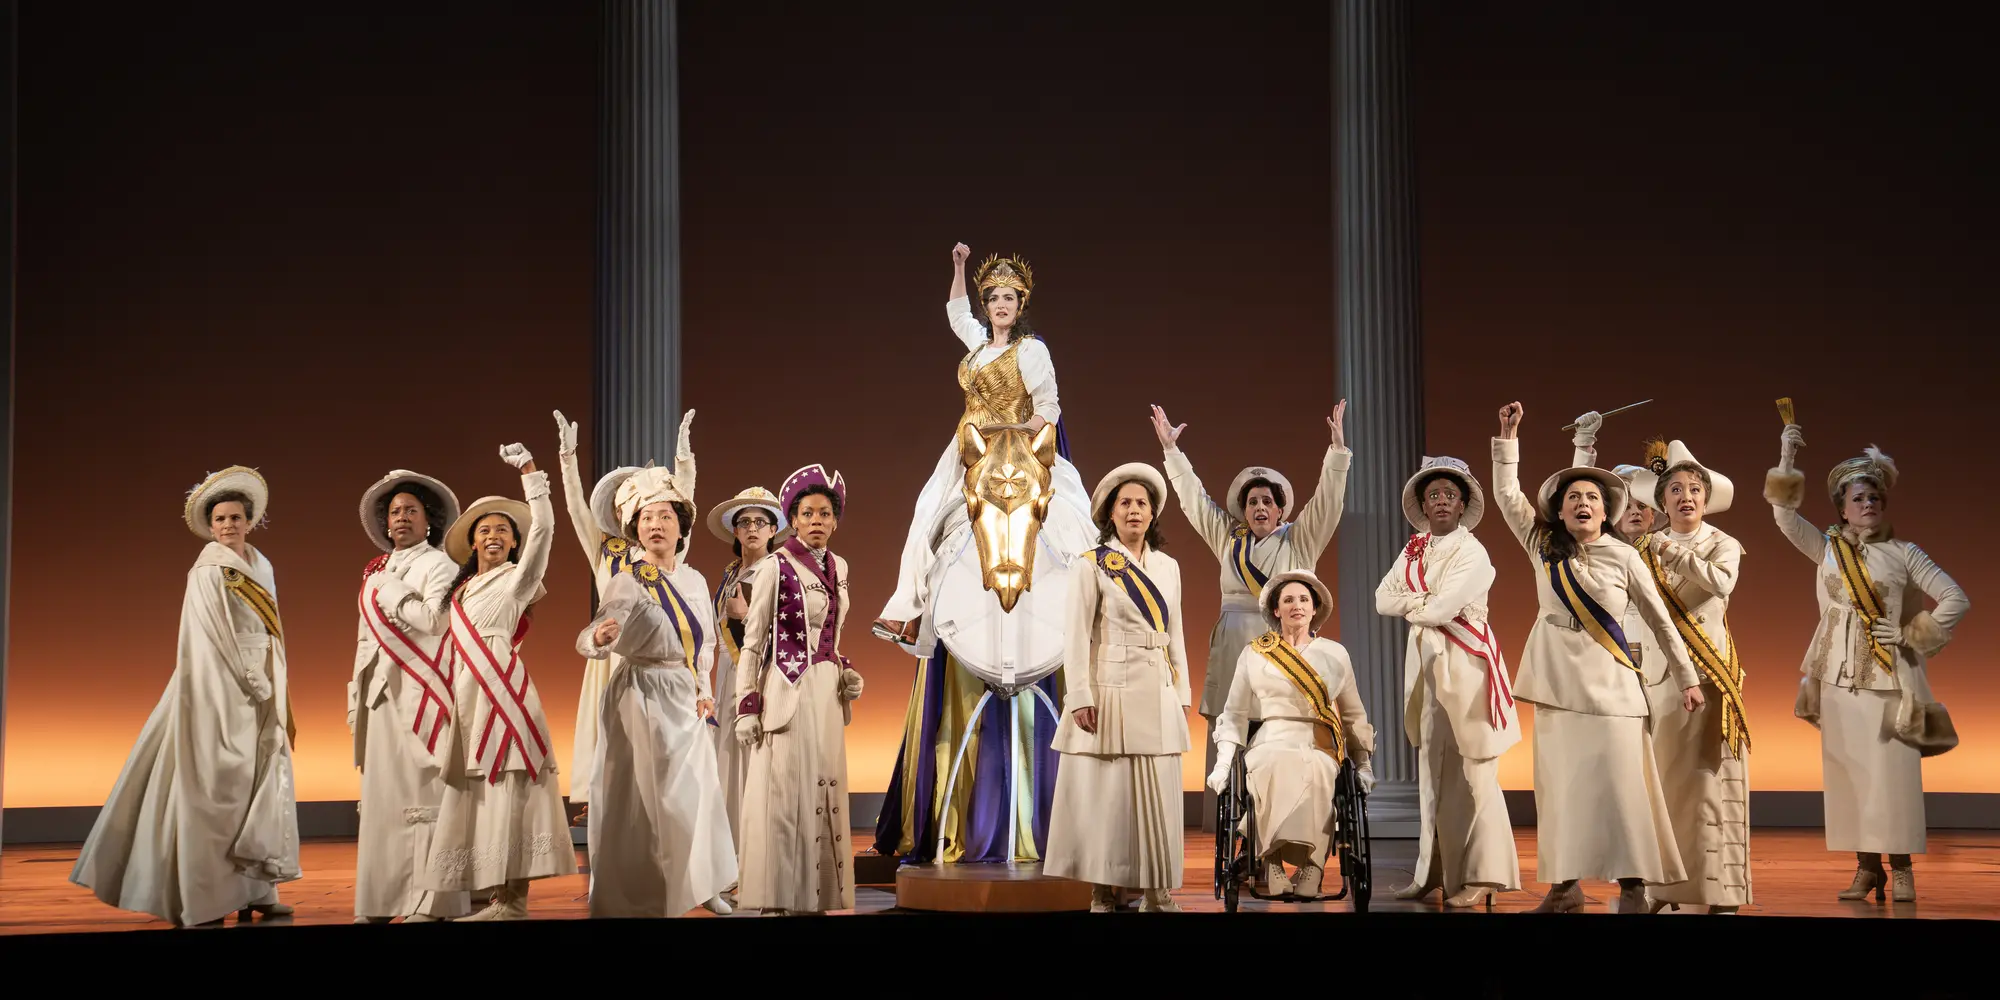 About 15 women, all dressed in ivory wearing hats and sashes to emulate the 1920s, stand on a stage, looking toward the audience. One woman in the center, on top of a prop made to look like a horse, wears a gold headdress and top akin to a Greek goddess.